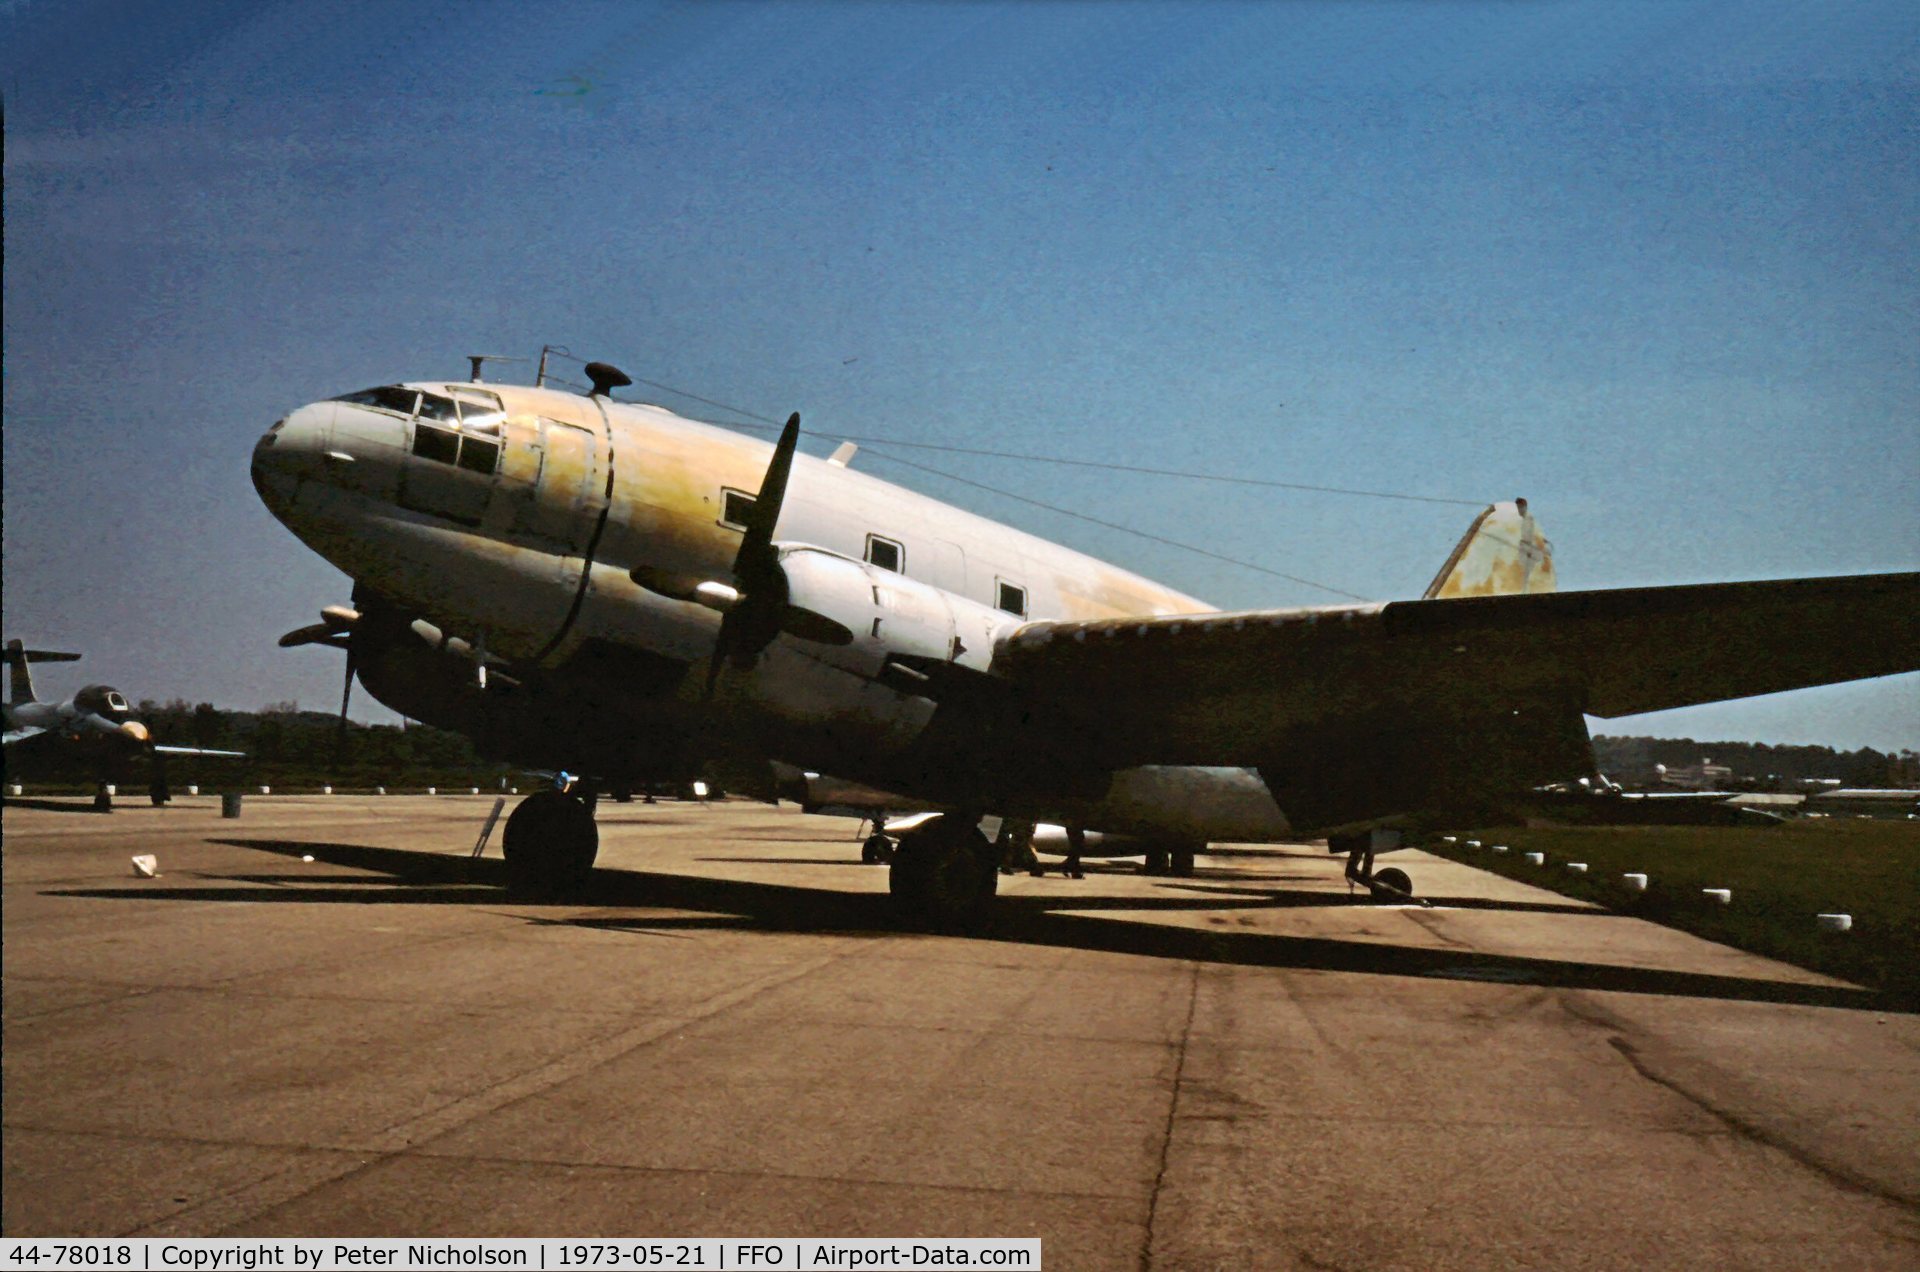 44-78018, 1944 Curtiss C-46D-15-CU Commando C/N 33414, As displayed in the summer of 1973.